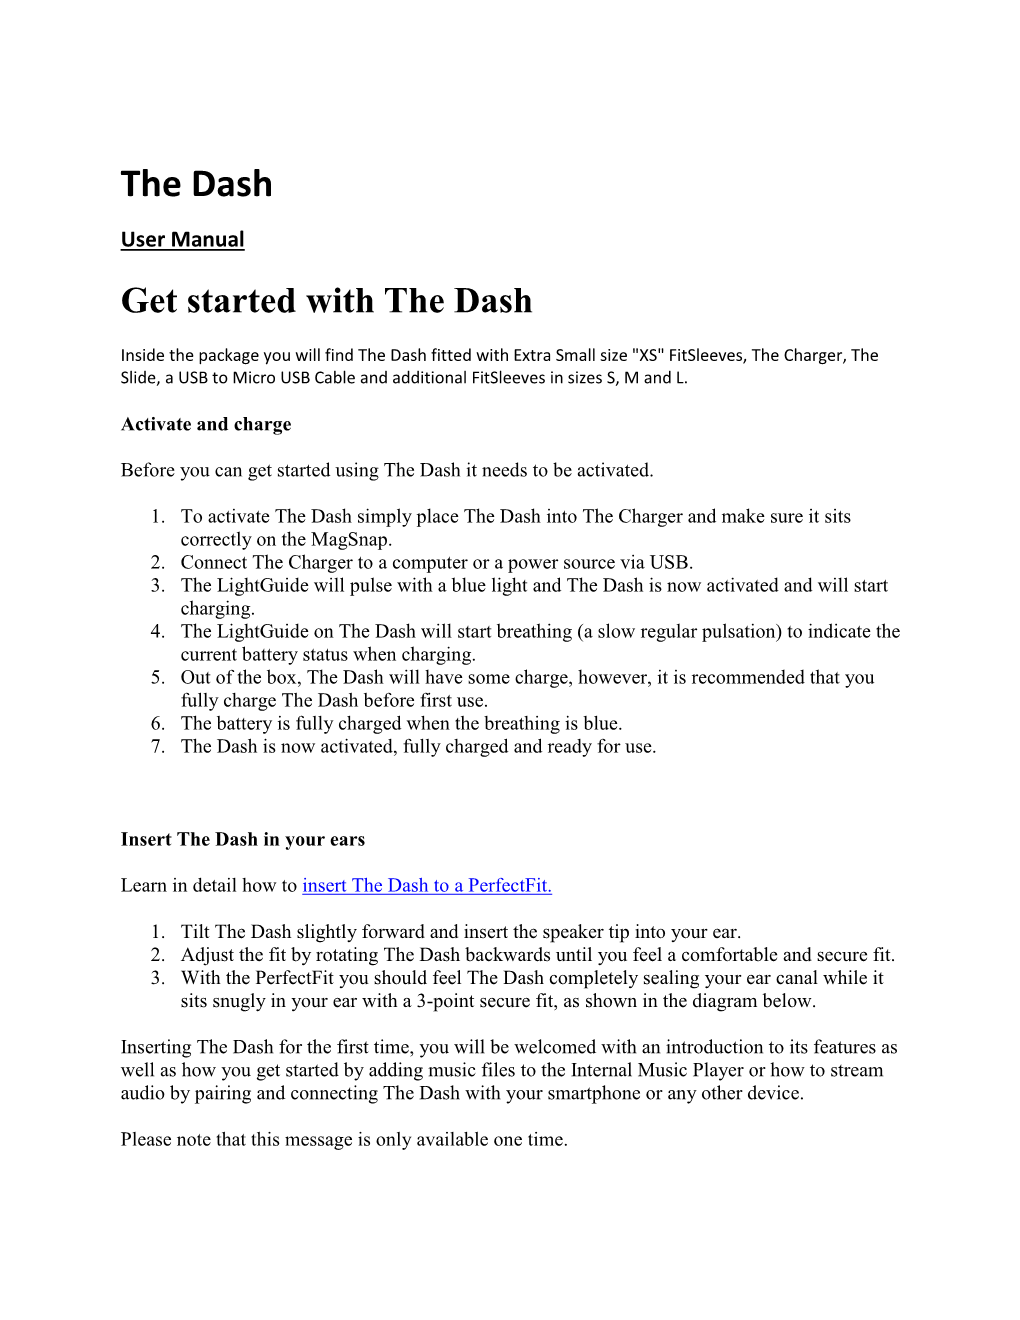 The Dash User Manual Get Started with the Dash